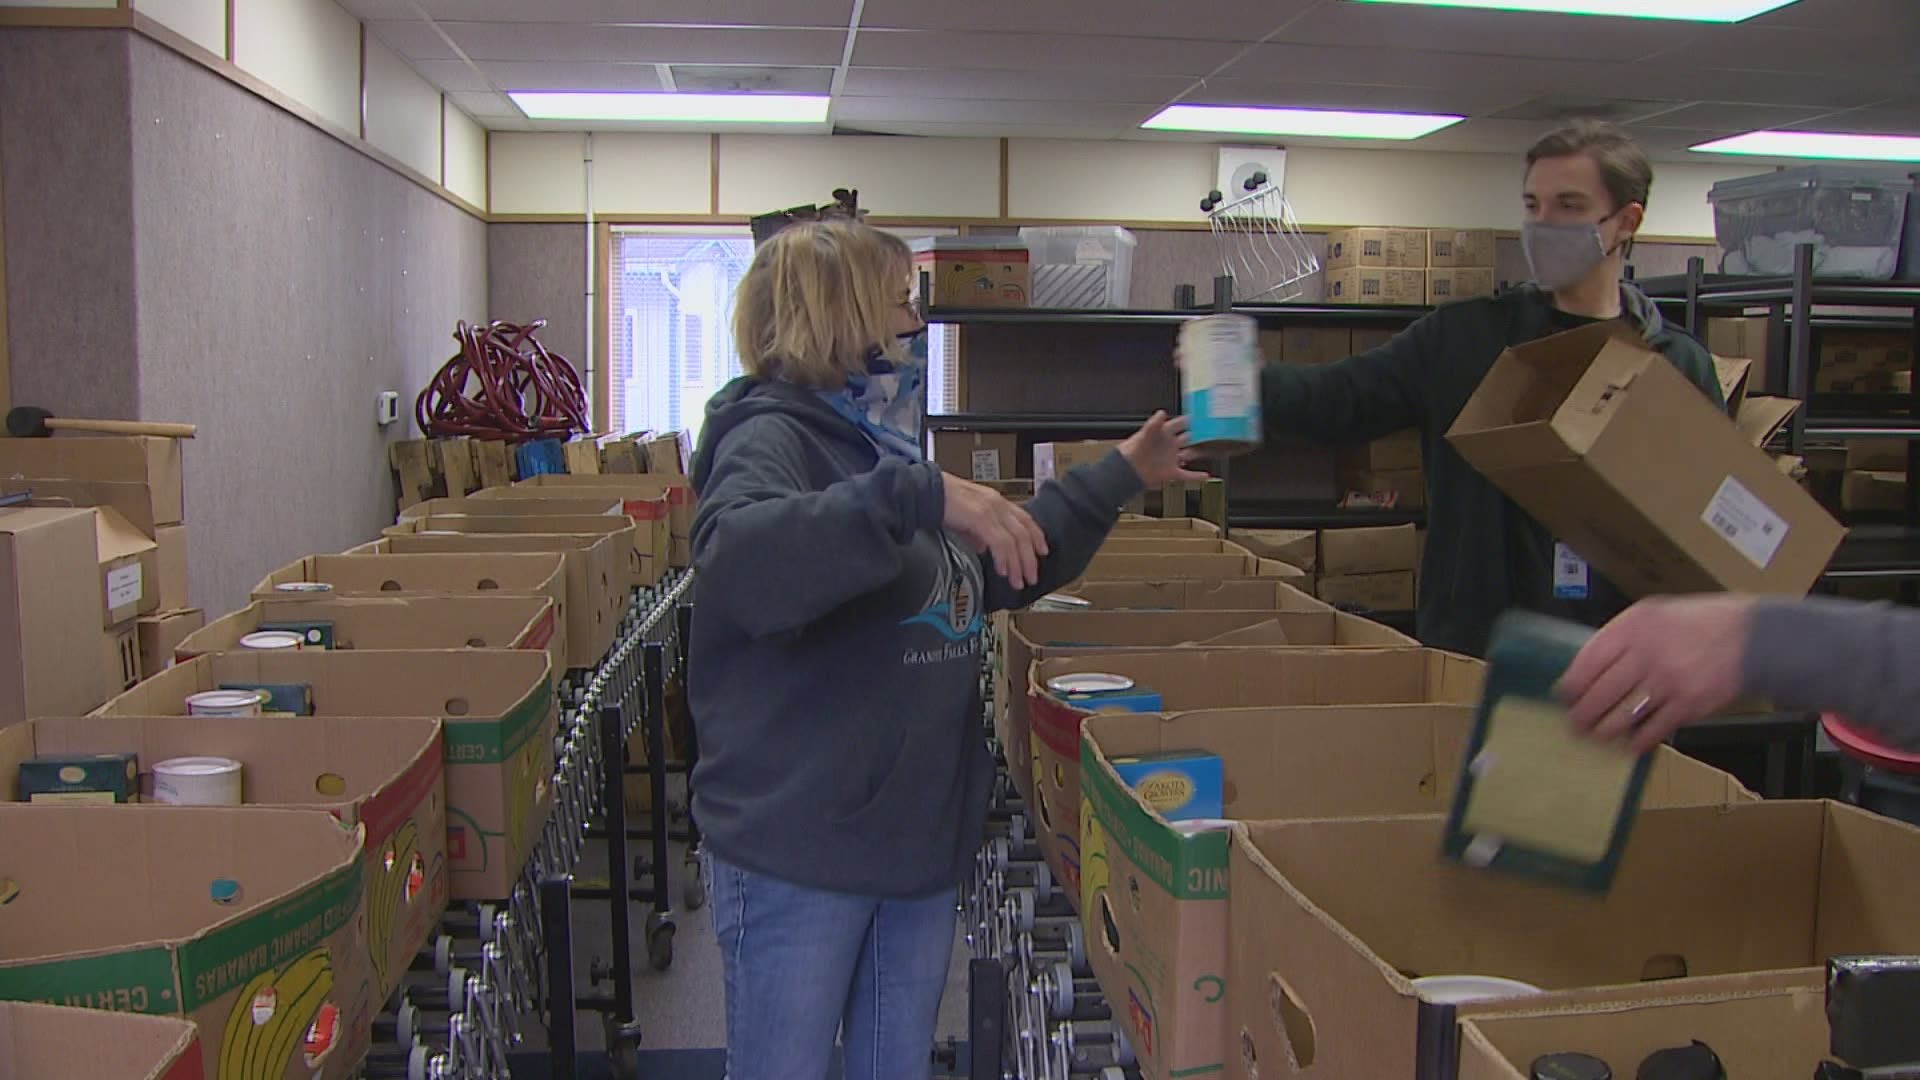 The food bank and community coalition say they're better able to address their community's needs after the COVID-19 pandemic brought them to the forefront.